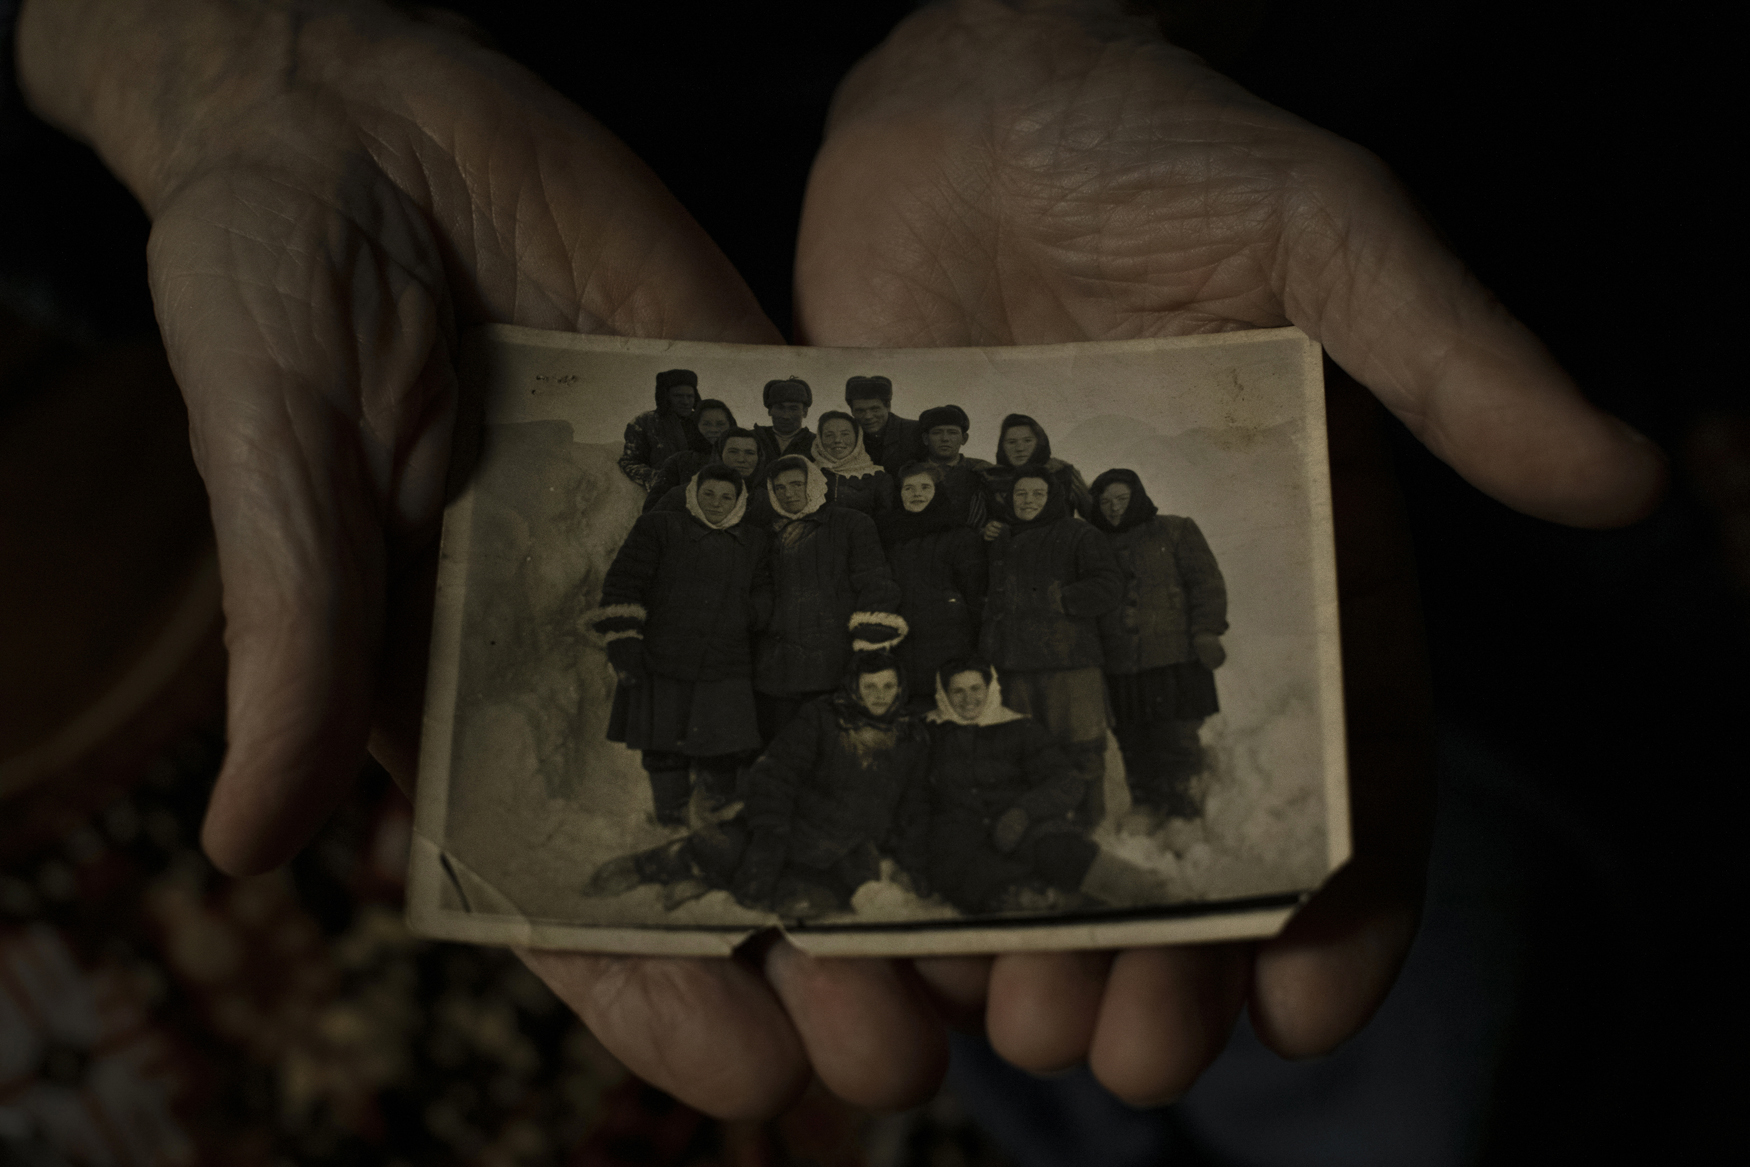 Magadan, Russia - November 29, 2019. [Portrait] A photograph of Antonina Novosad’s work brigade, taken in one of Kolyma's forced labour camps. Born in 1927 in western Ukraine, Novosad was sentenced to 10 years on fabricated political charges and was released in 1956 after serving nine years. Kolyma Region, Russia - November 17, 2019. Remnants of barracks of the Butugychag forced labour camp. There, after the Second World War, prisoners of Stalin’s gulags mined uranium that was used in the Soviet nuclear weapons program. MAGADAN, Russia - 30 October, 2019. Descendants of victims of political repression commemorate those who died in the Soviet forced labour camps of the Kolyma region. At the 'Mask of Sorrow' monument, which stands above the city of Magadan, they are joined by officials and service members. © Emile Ducke Kolyma, Along the Road of Bones